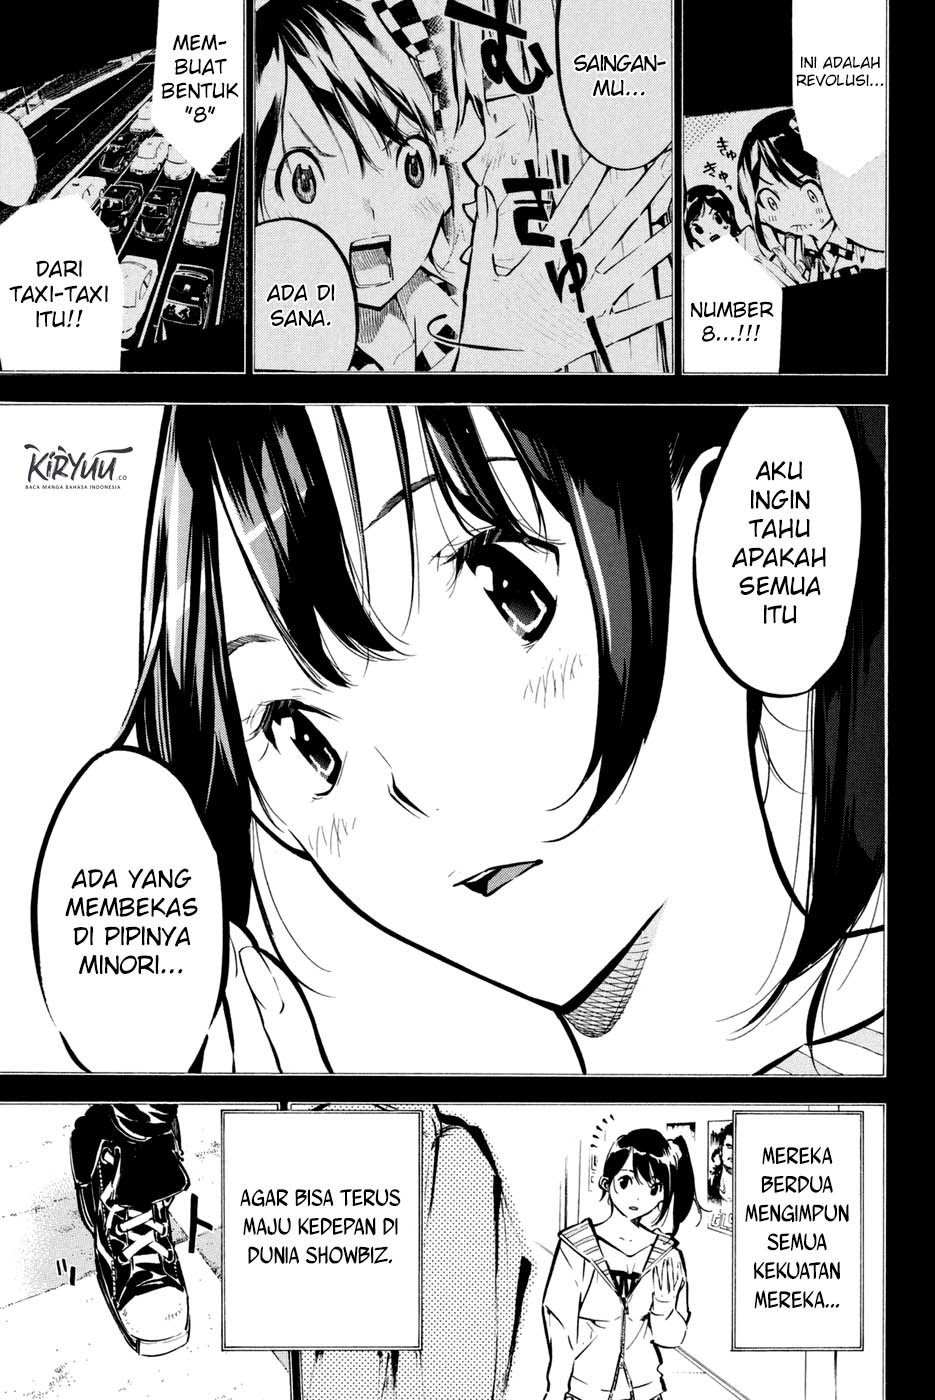 AKB 49 Chapter 179